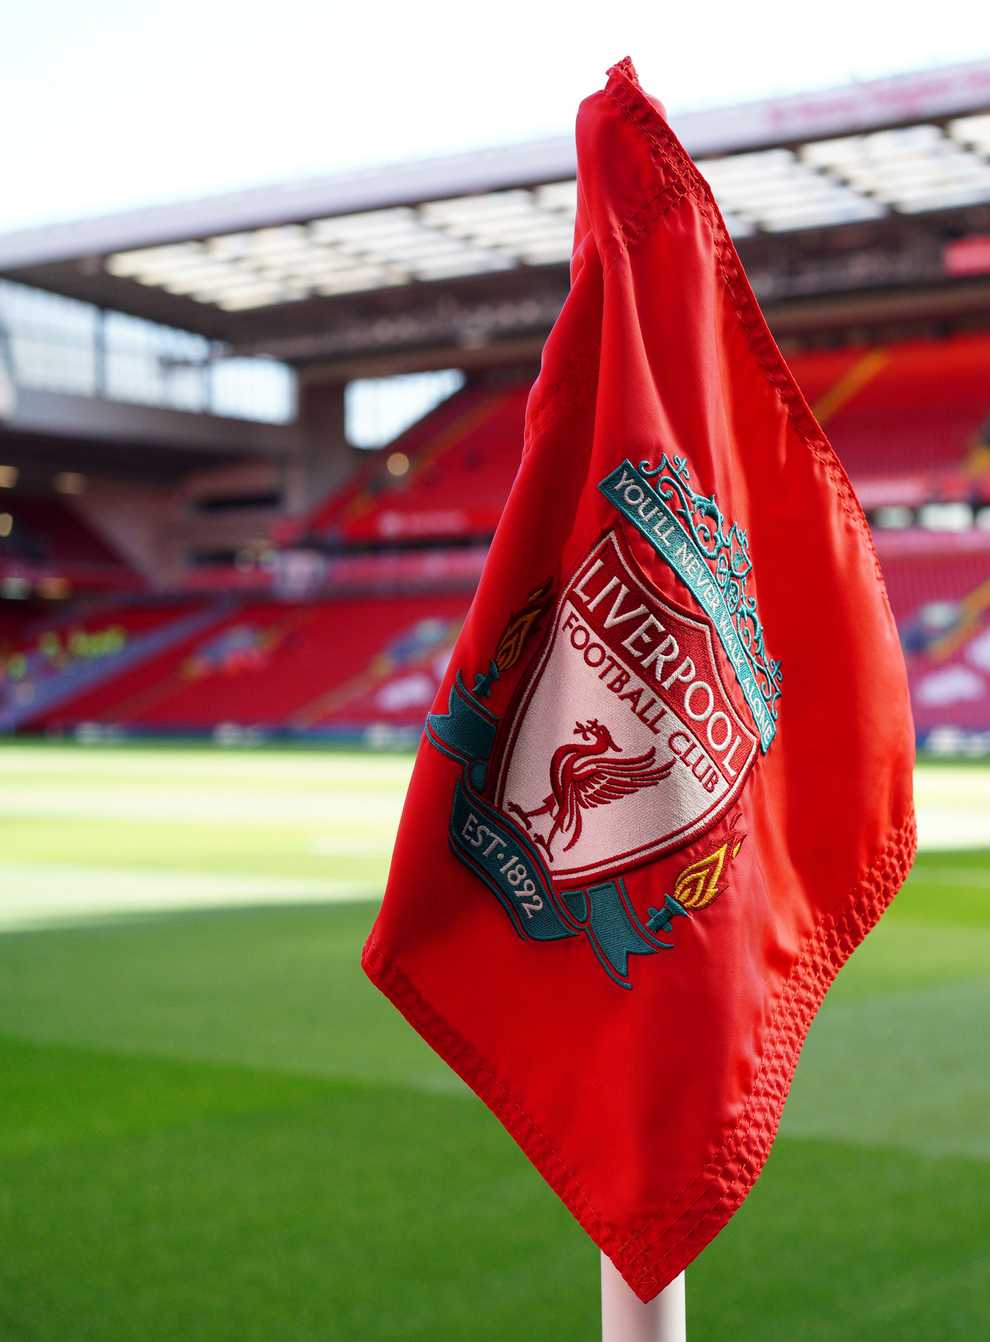 Three men have been arrested for alleged homophobic chanting at Anfield (Peter Byrne/PA)